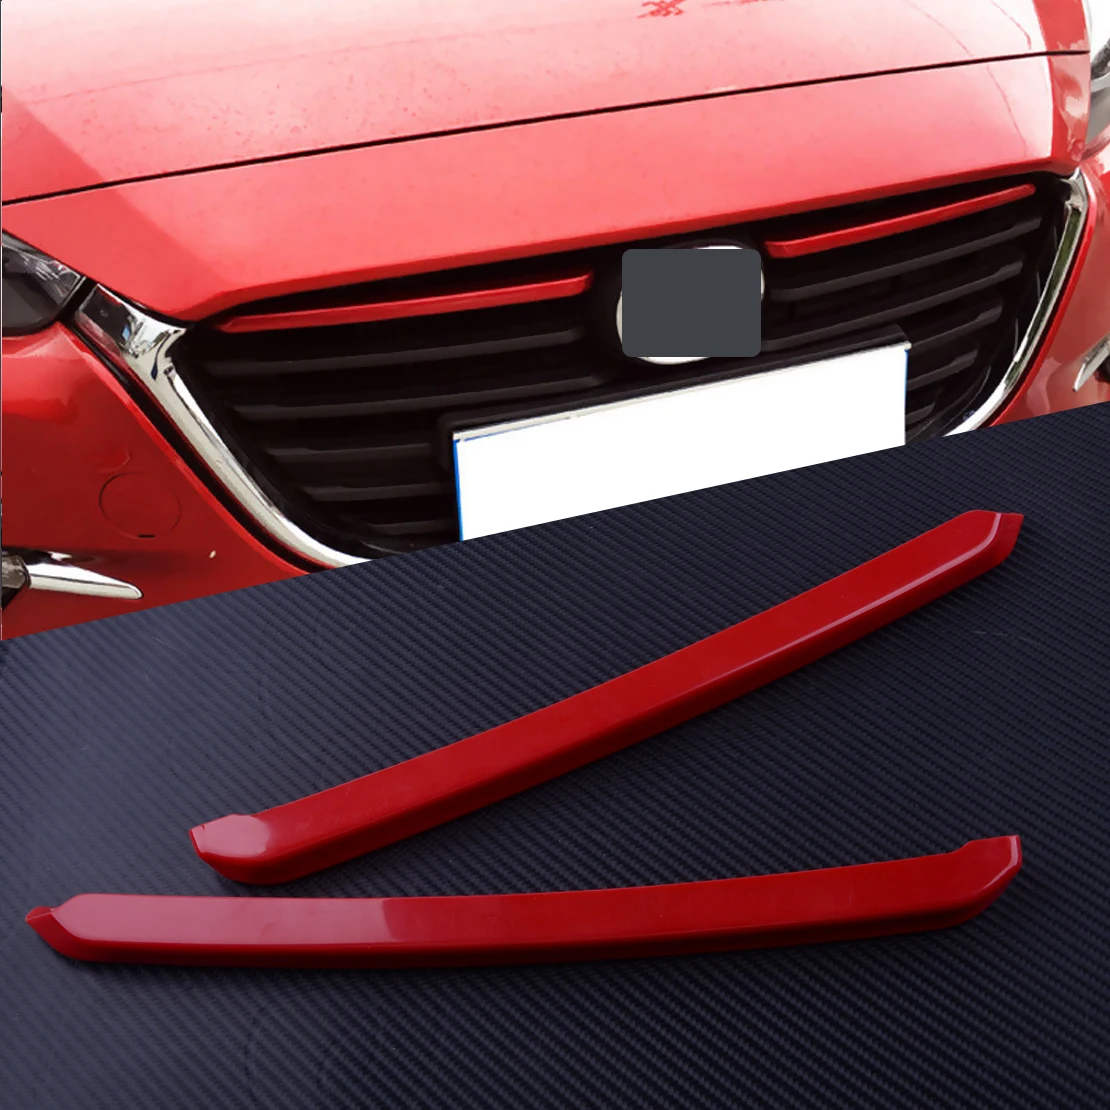 2Pcs Car Red ABS Front Bumper Grille Grill Cover Trim Fit For Mazda 3 Axela 2017 2018 32.5x1.8 cm Accessories